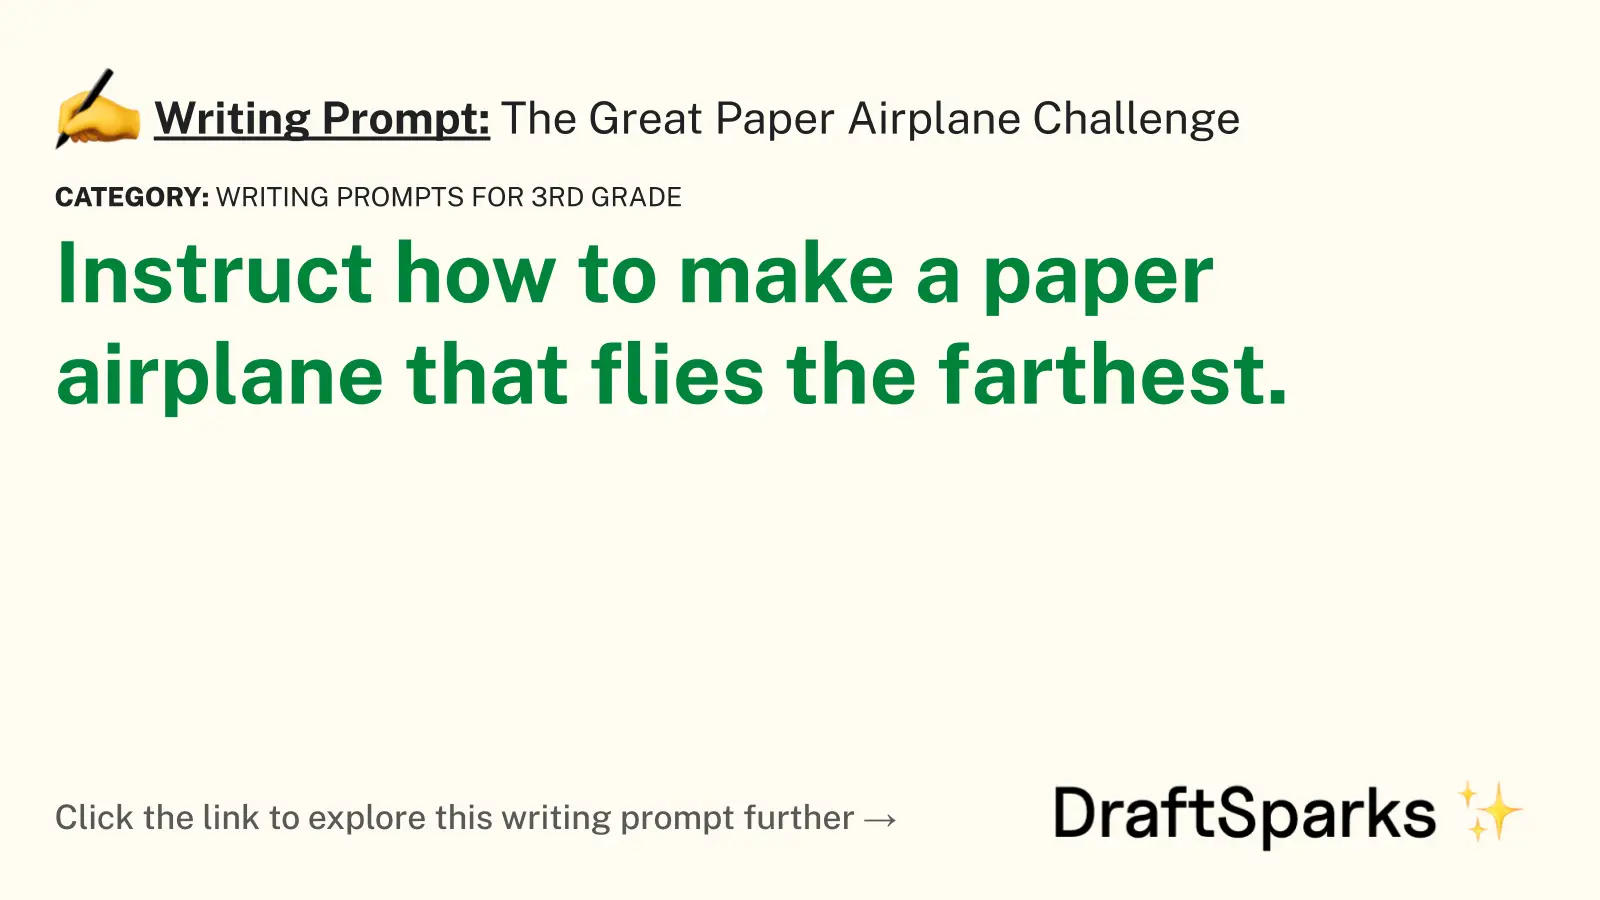 The Great Paper Airplane Challenge